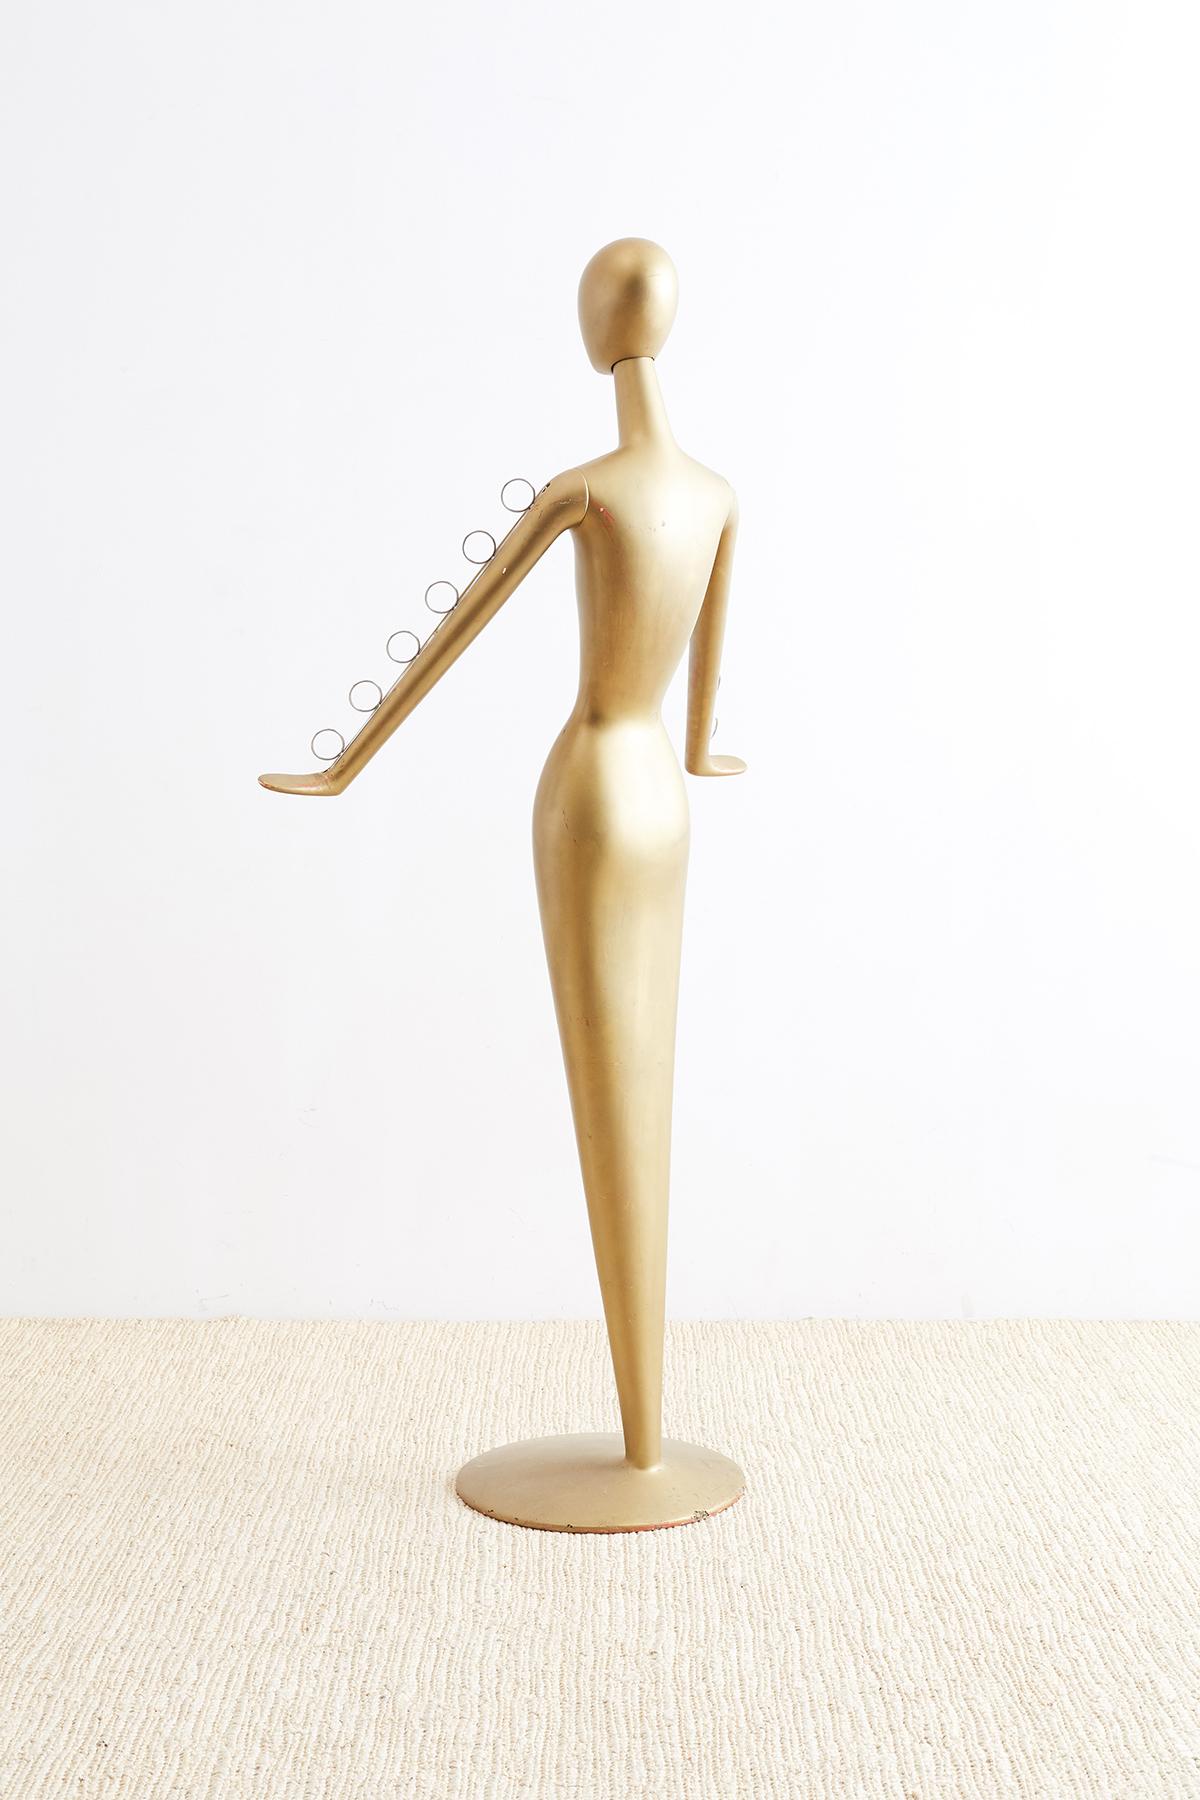 European Abstract Tulip Form Female Mannequin Display Sculpture For Sale